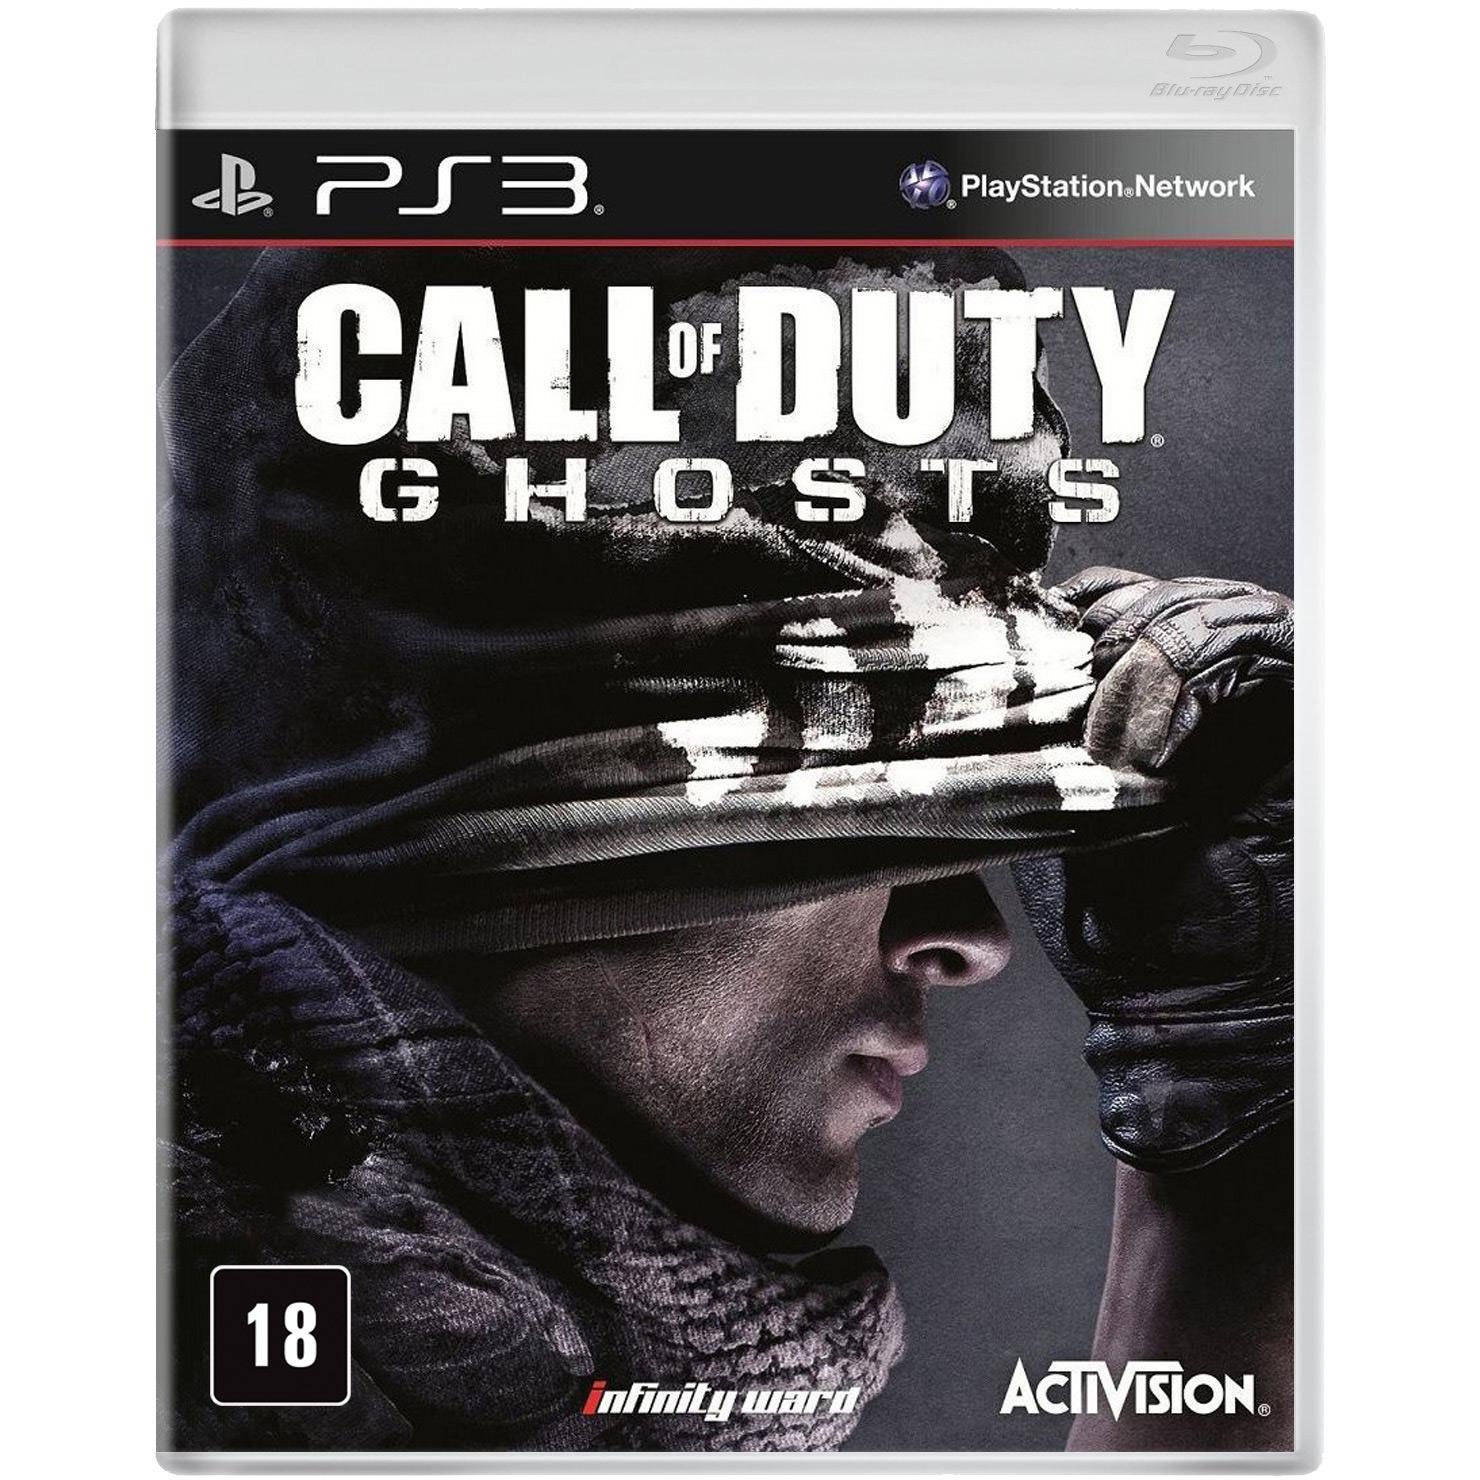 Game Call of Duty: Ghosts - PS3 é bom? Vale a pena?